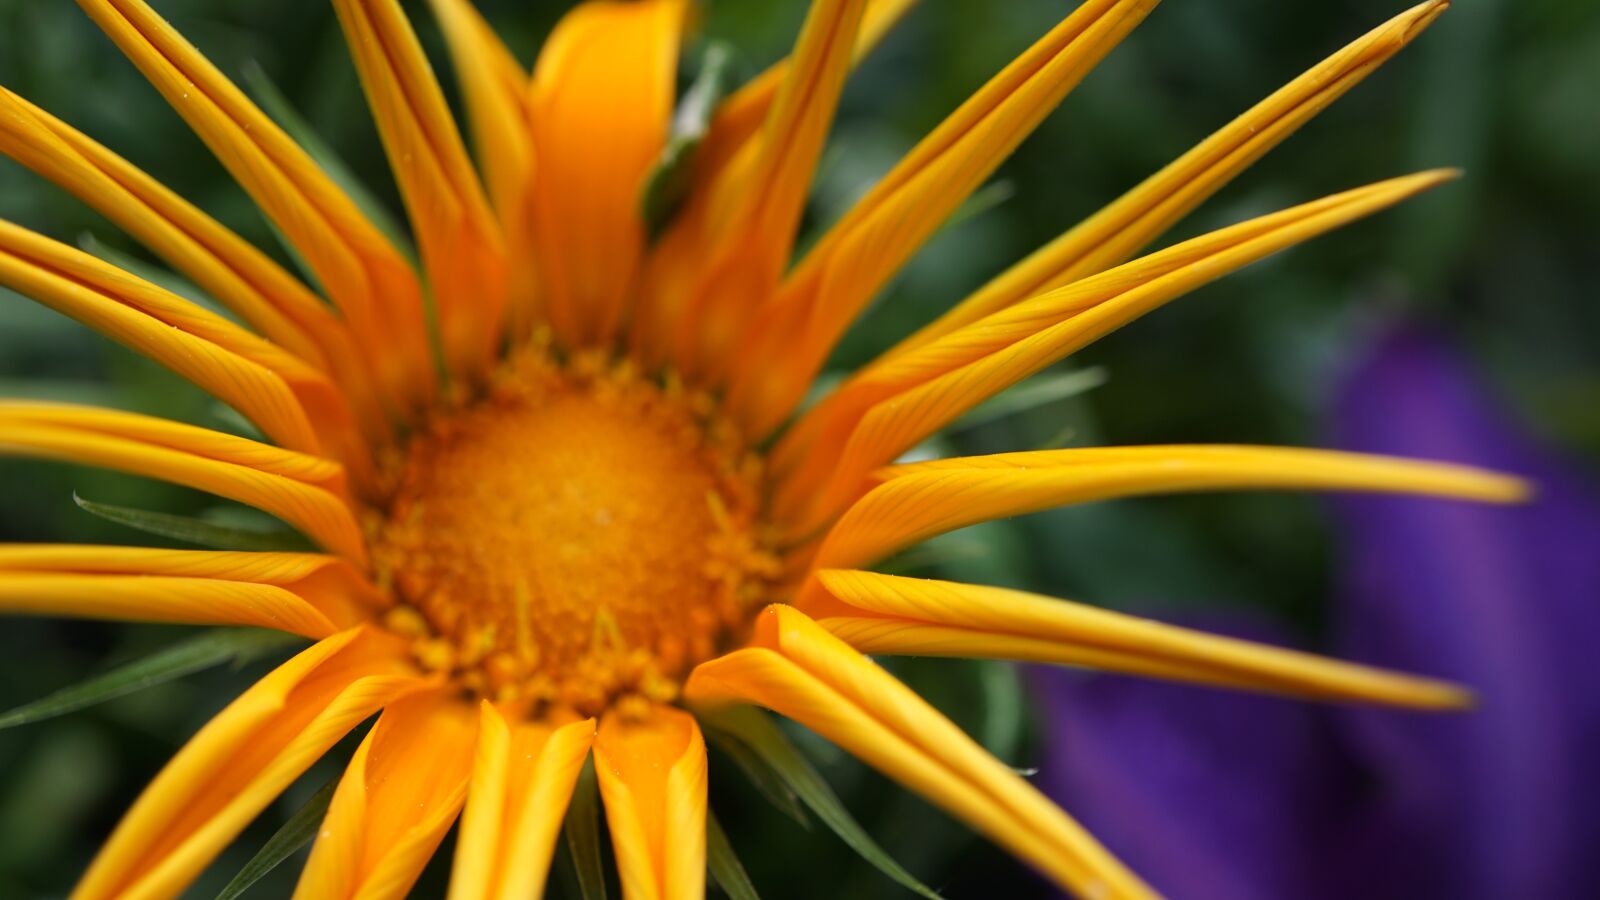 Sony a6000 sample photo. Marguerite, yellow, purple photography